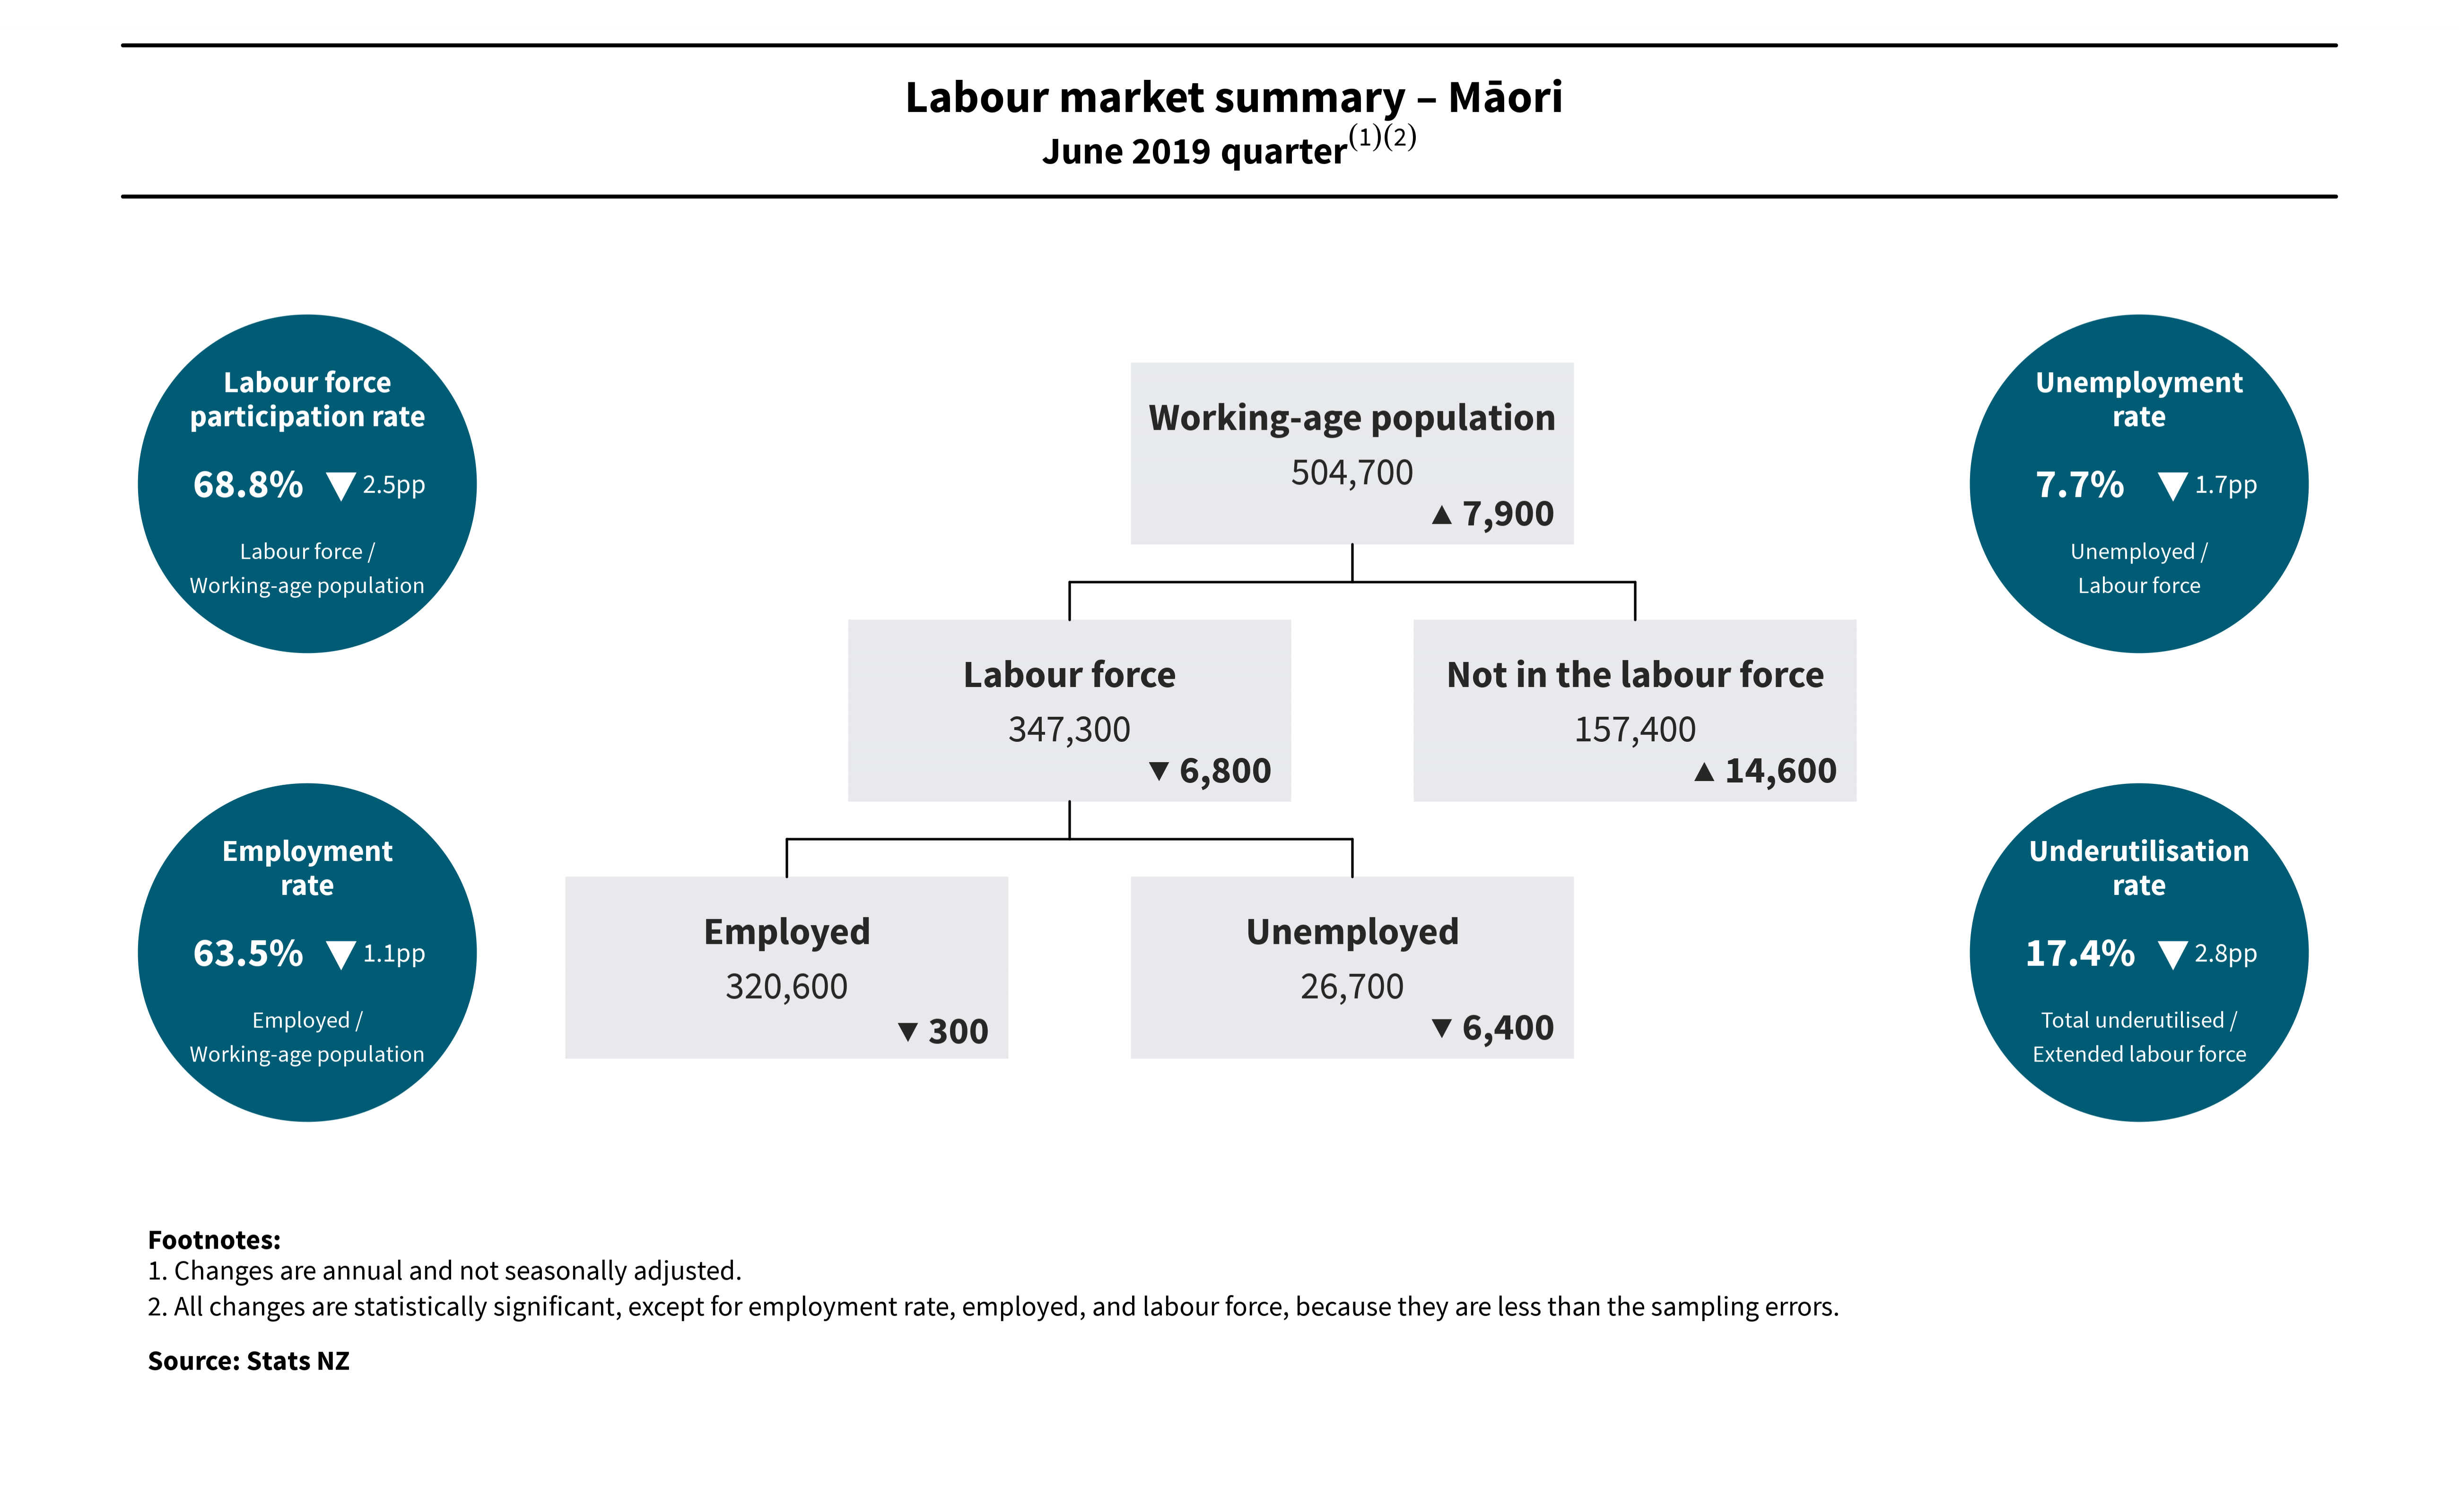 Diagram shows labour market summary for Māori - full text alternative available below